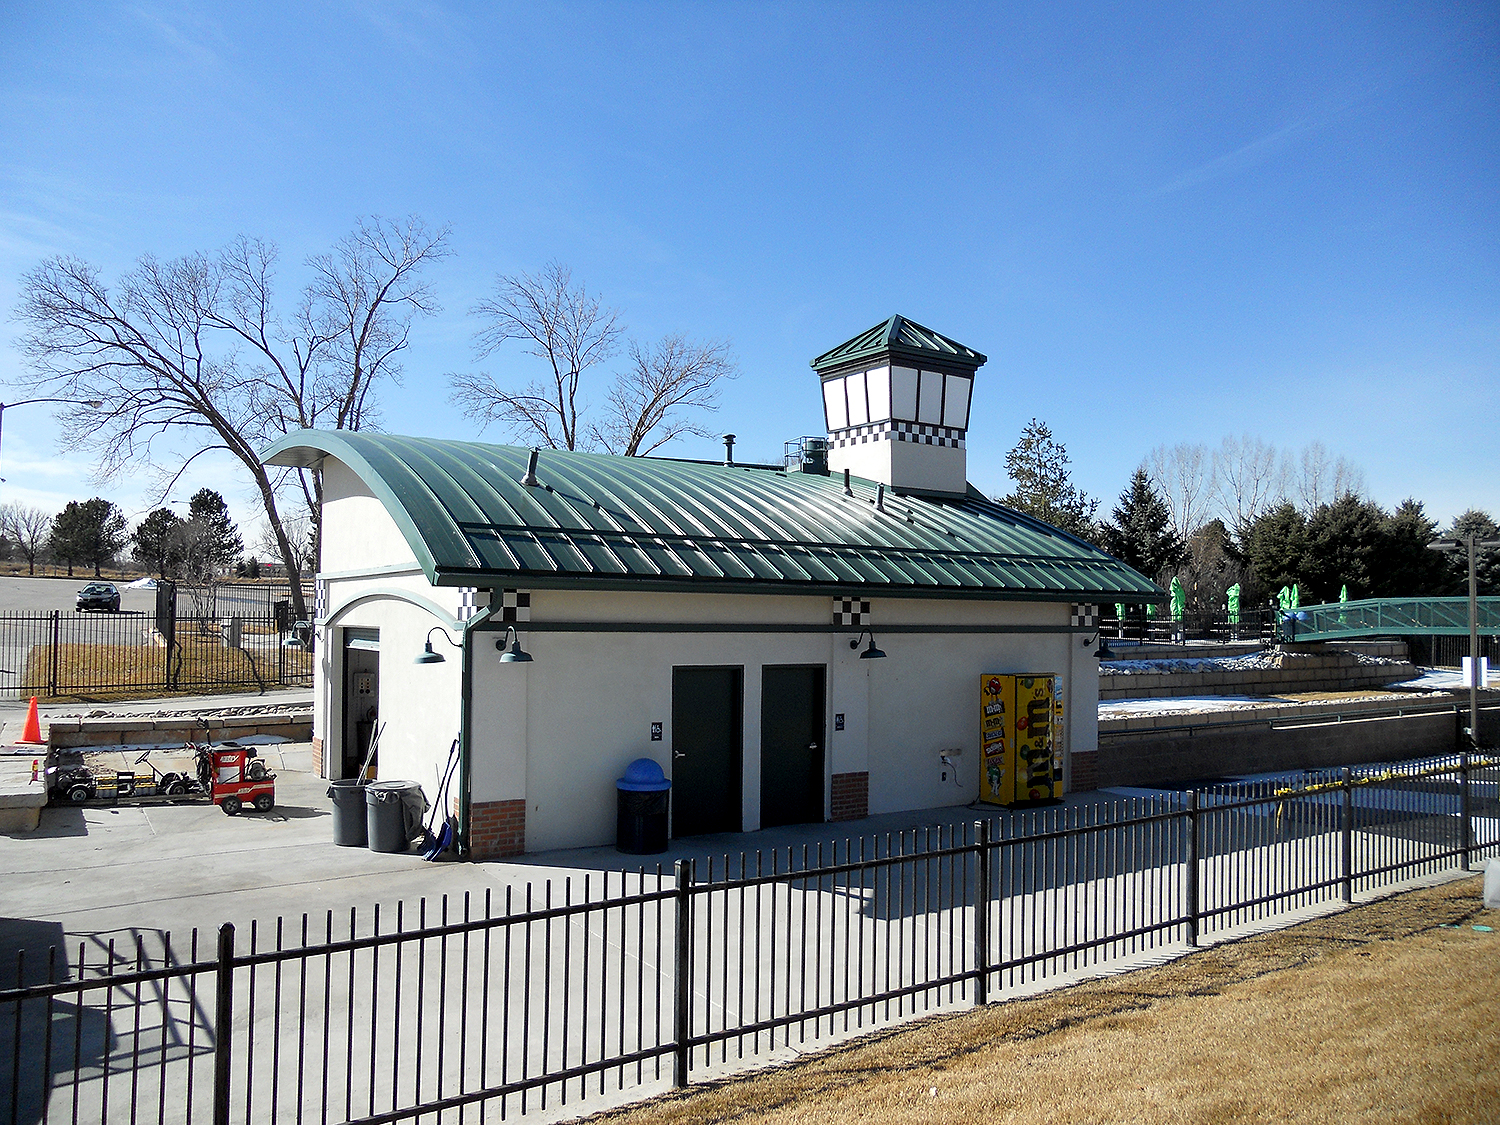 Curved standing seam metal roof